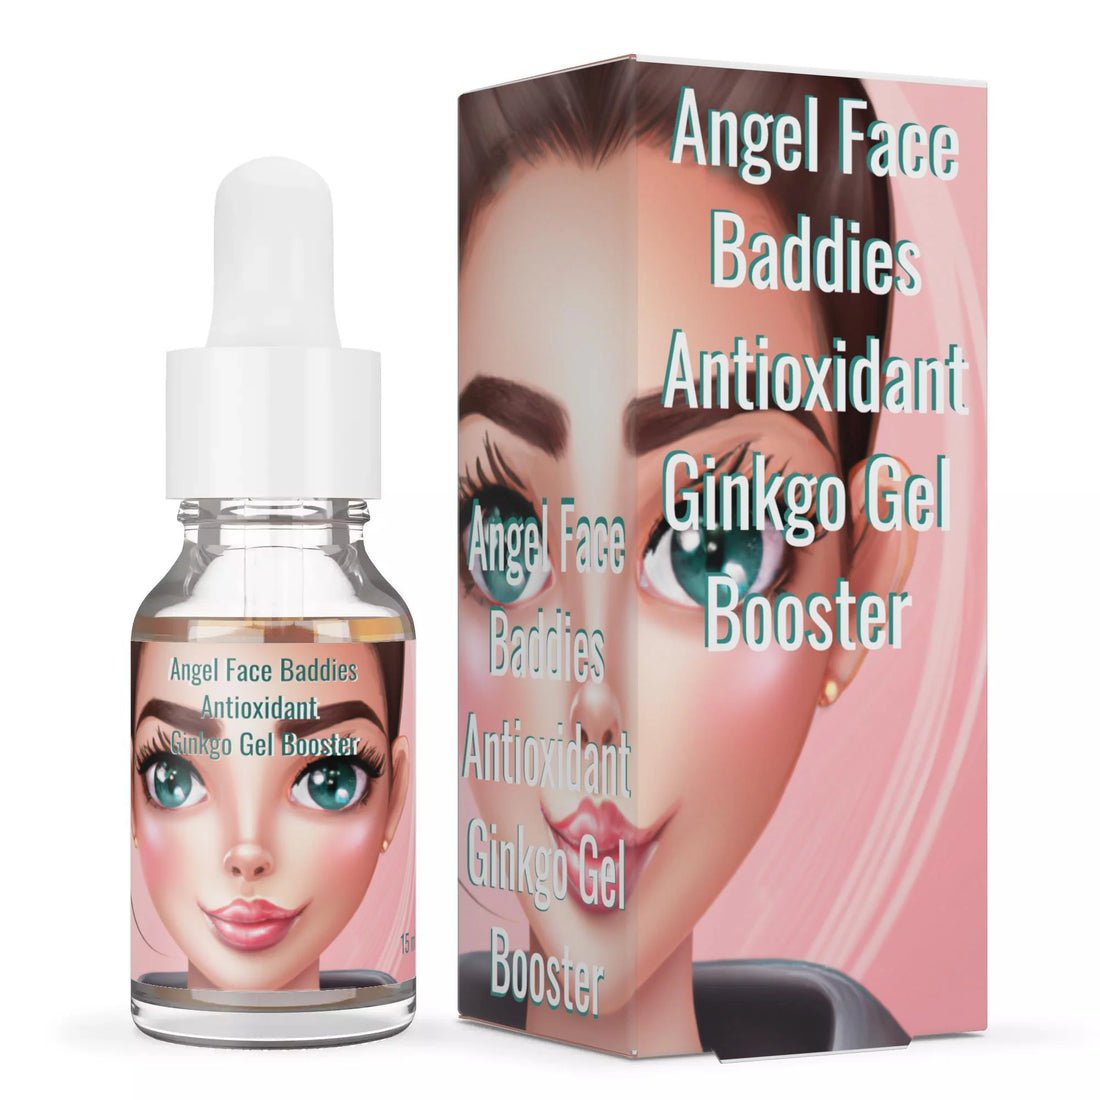 Angelface baddies ginkgo gel booster for radiance and beauty 